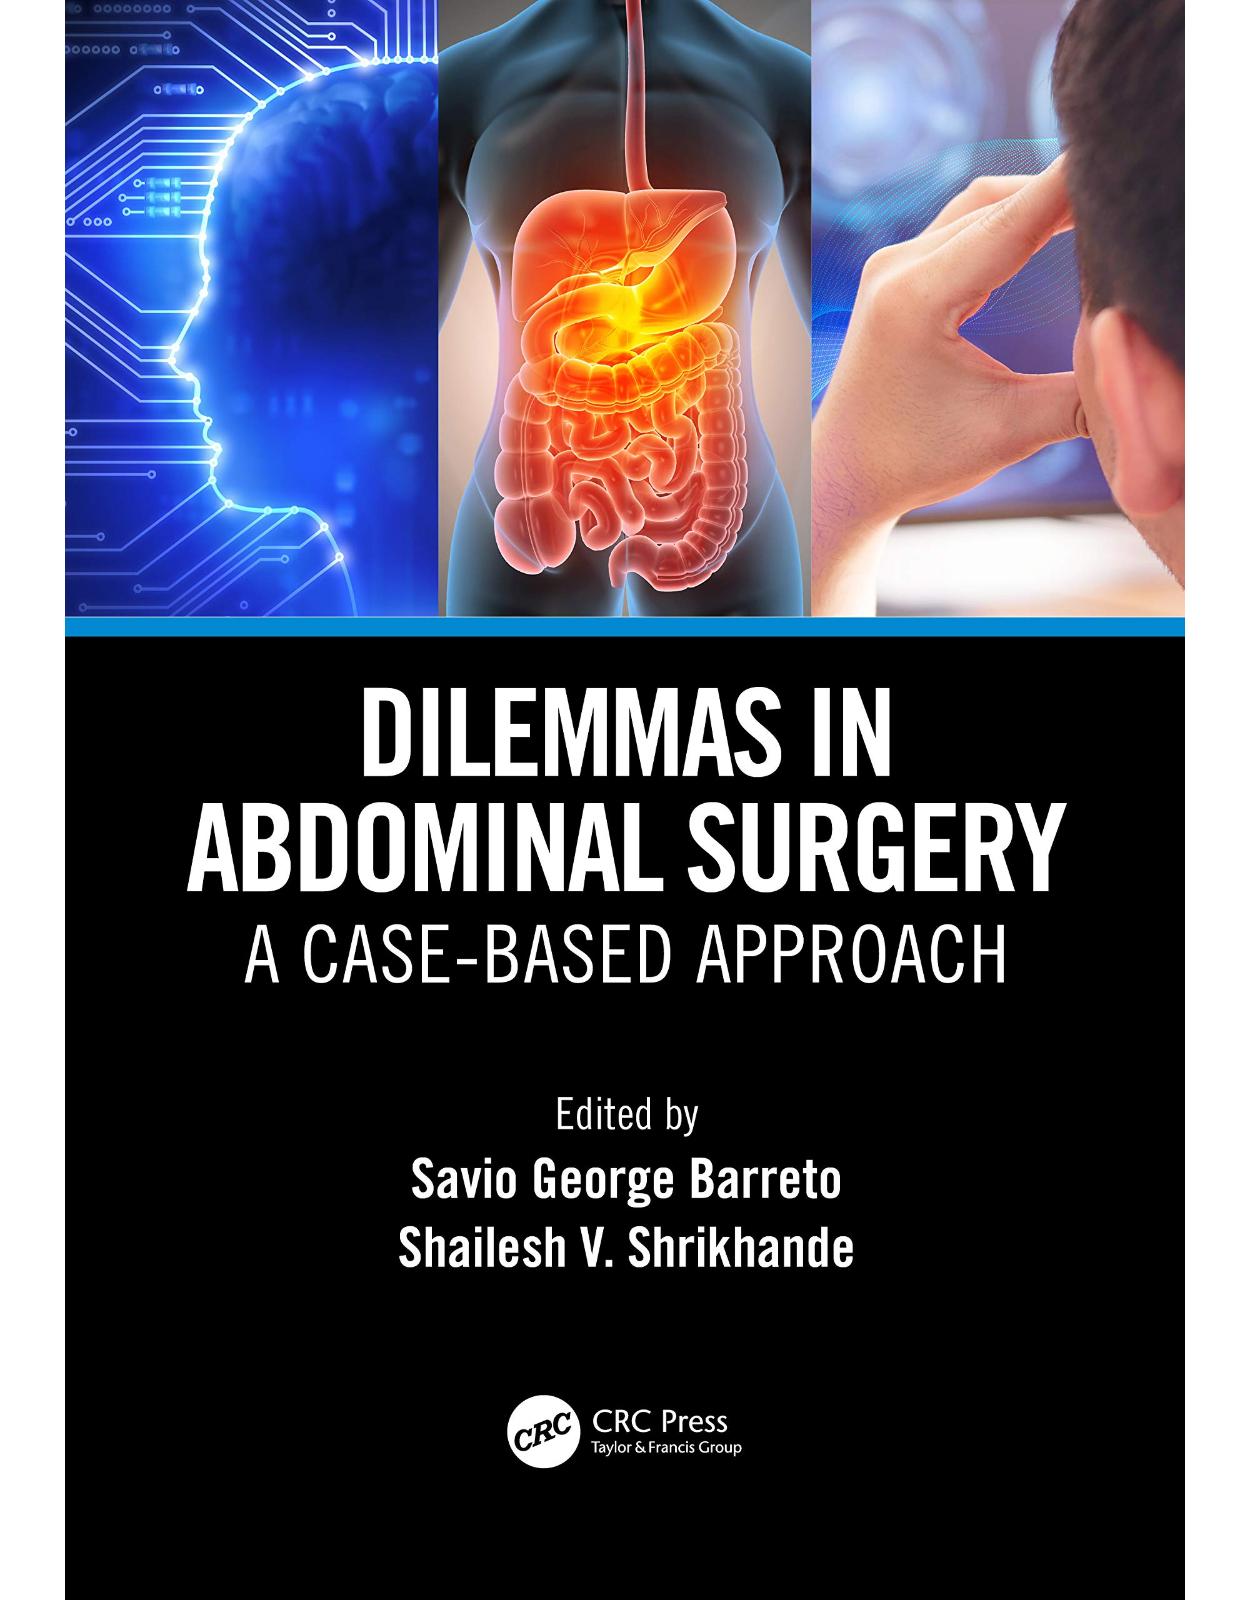 Dilemmas in Abdominal Surgery: A Case-Based Approach